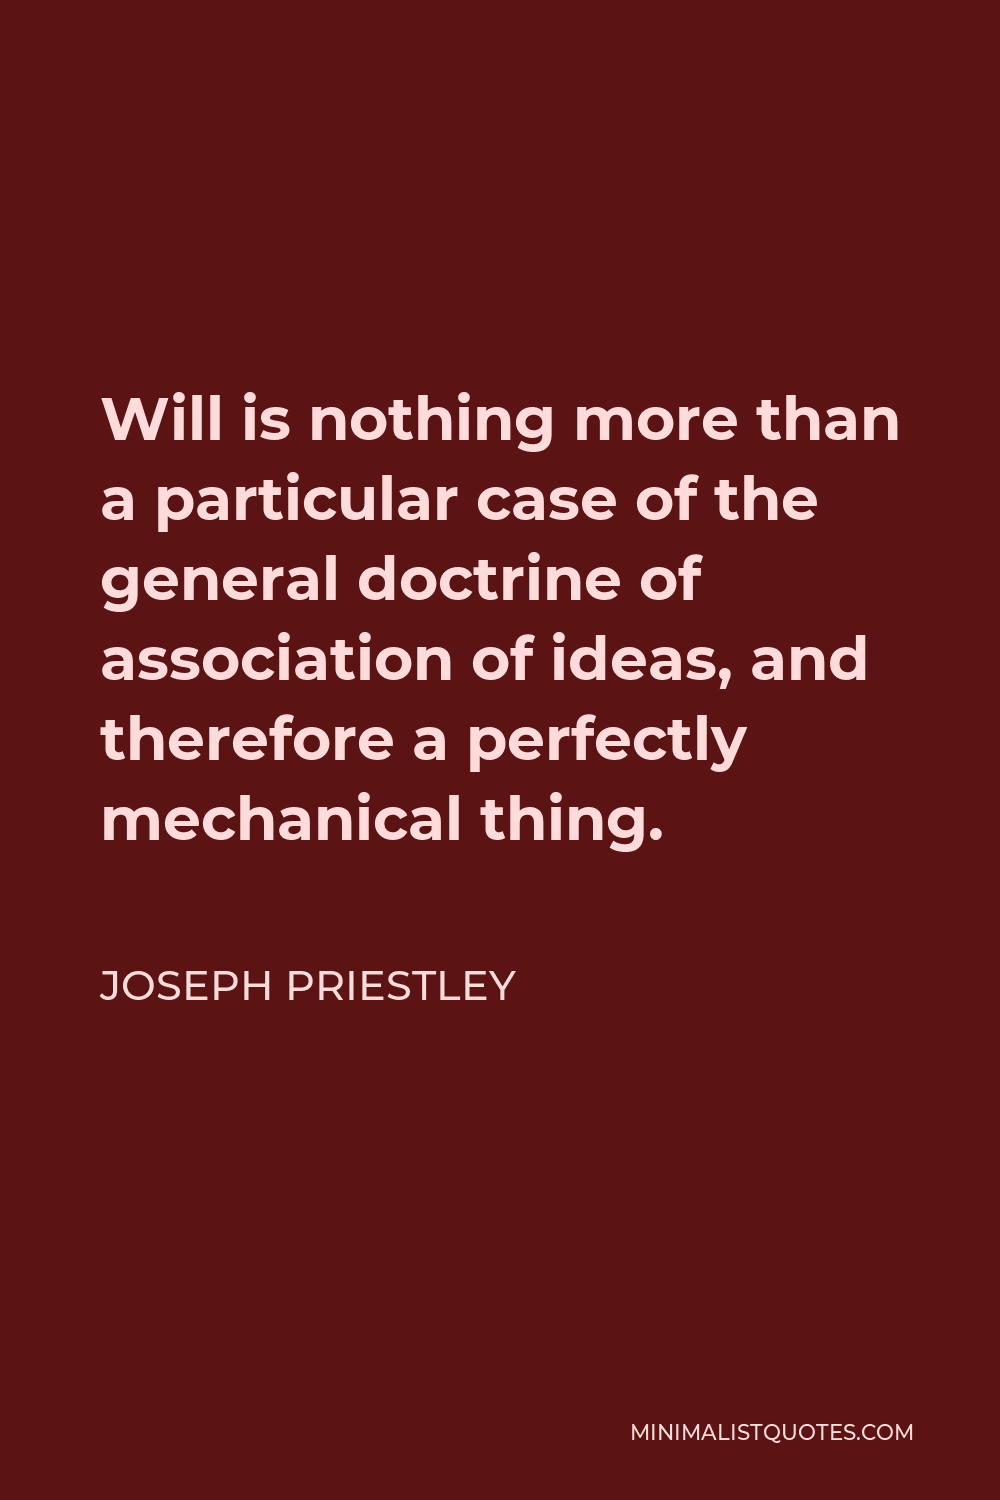 Joseph Priestley Quote - Will is nothing more than a particular case of the general doctrine of association of ideas, and therefore a perfectly mechanical thing.